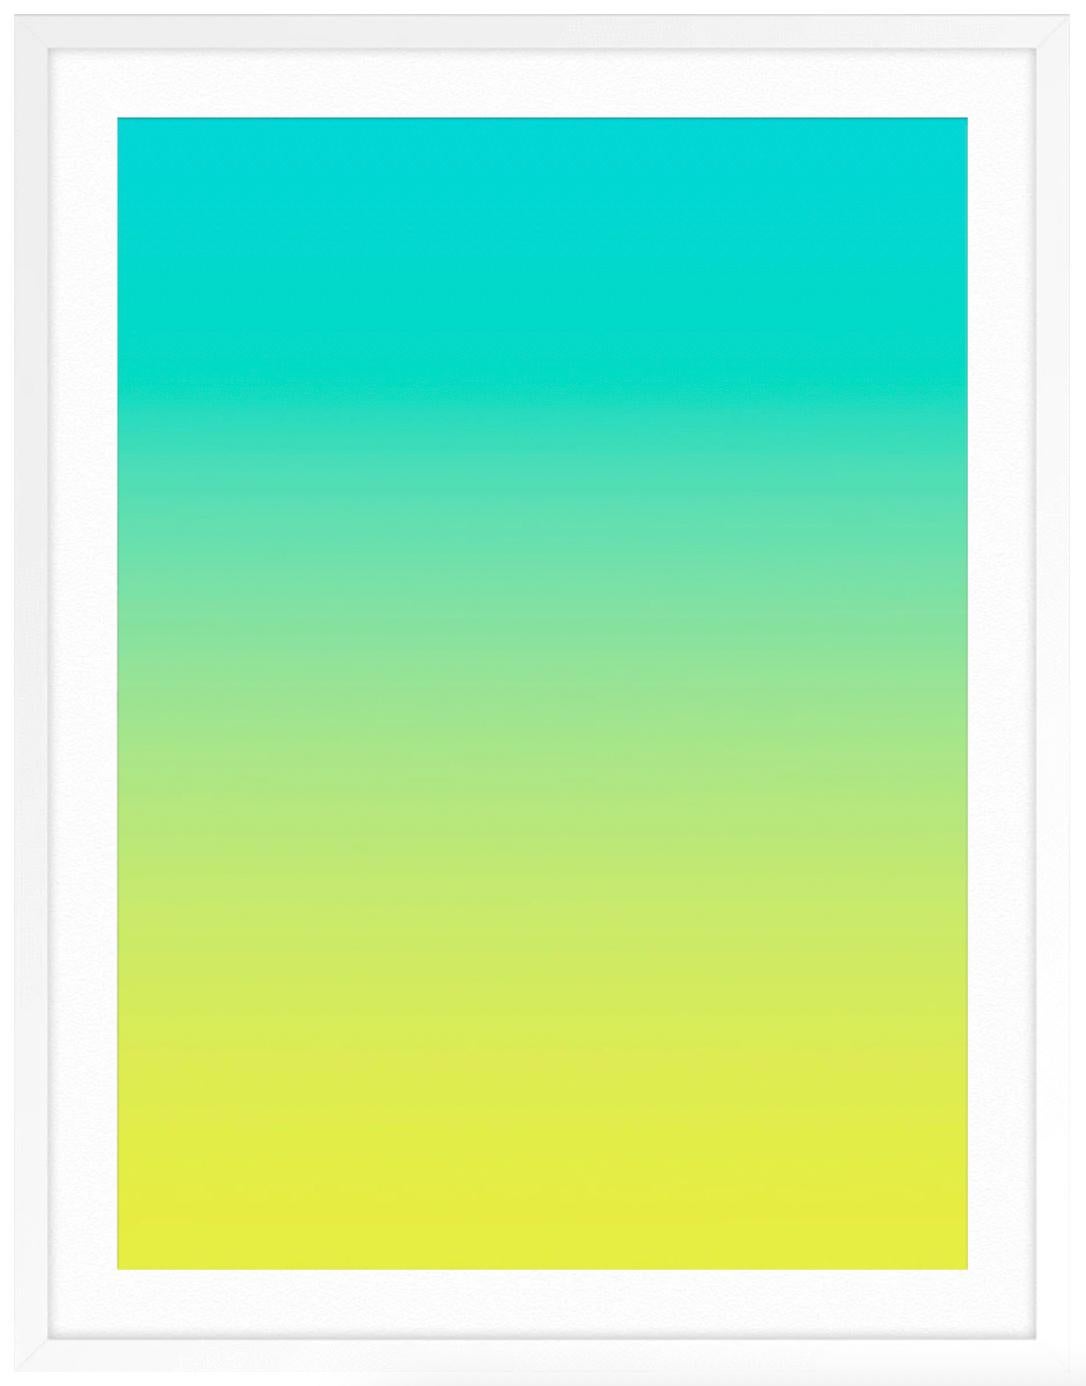 Ombré Sky No2 - Yellow Abstract Print by Jessica Nugent